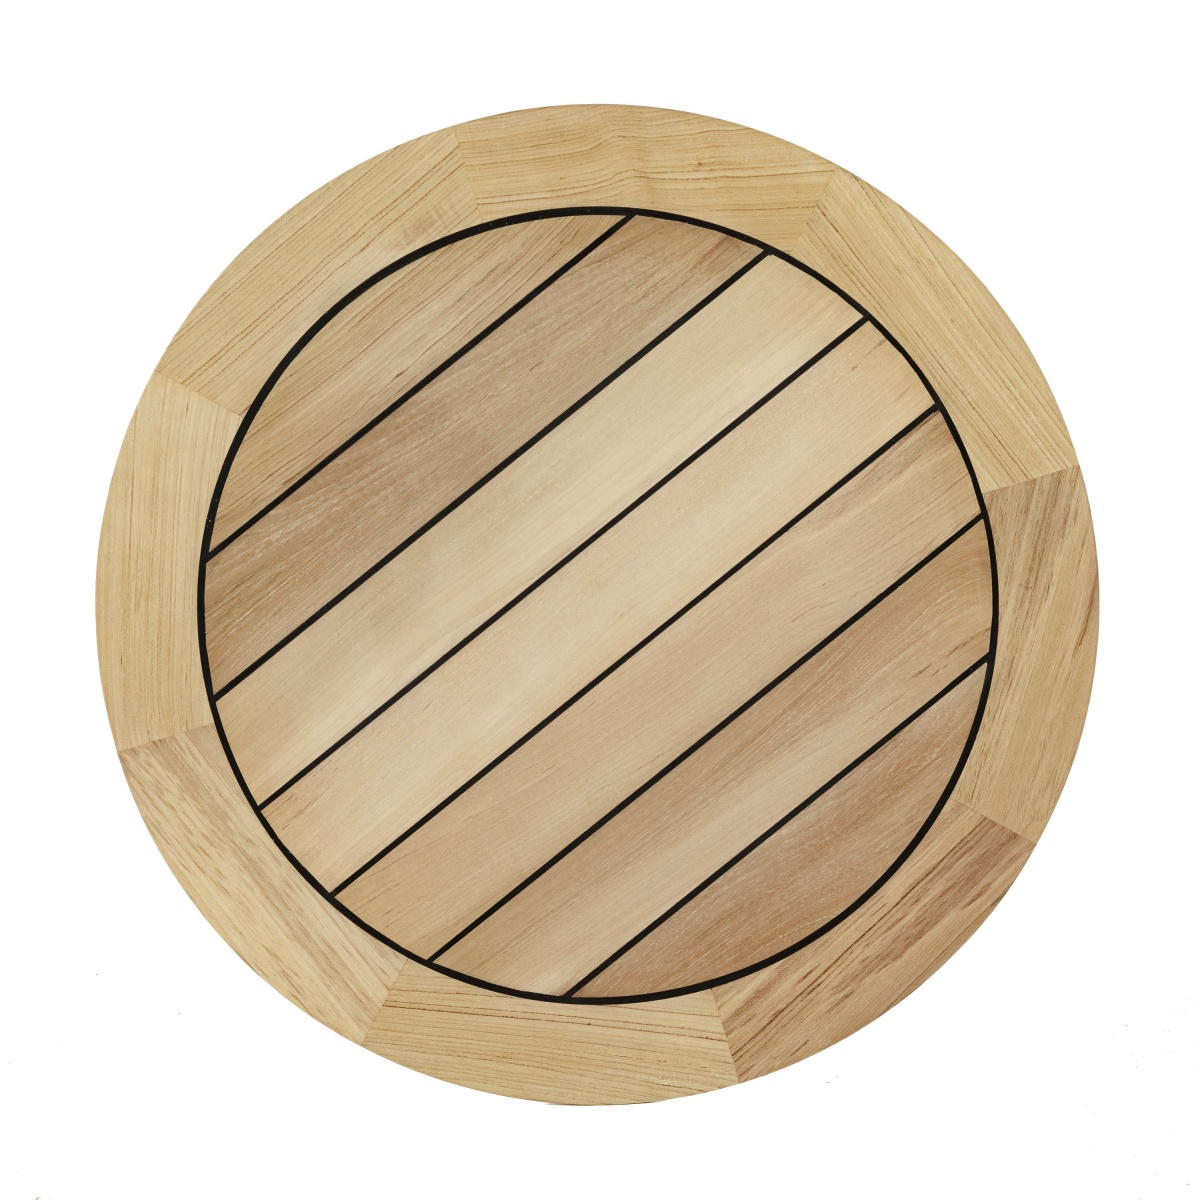 Vogue 48 In Round Teak Table Top, 48 Inch Round Wooden Table Top